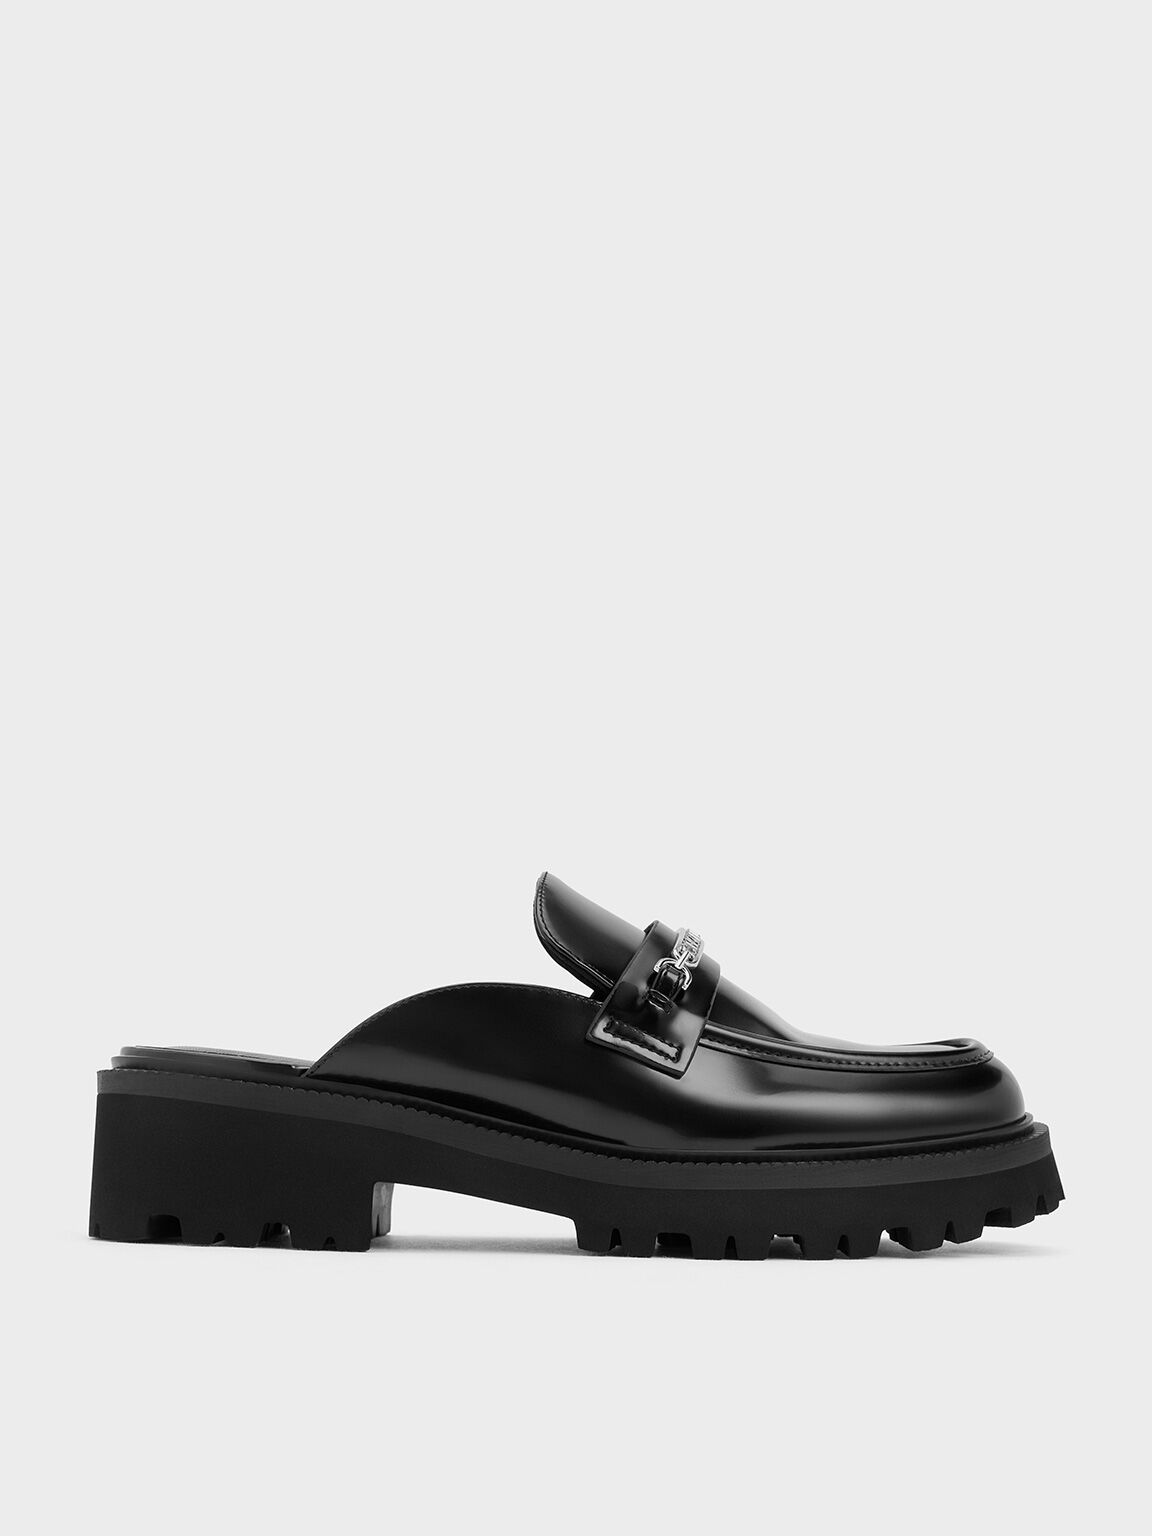 Remy Metallic-Accent Loafer Mules, Black Box, hi-res